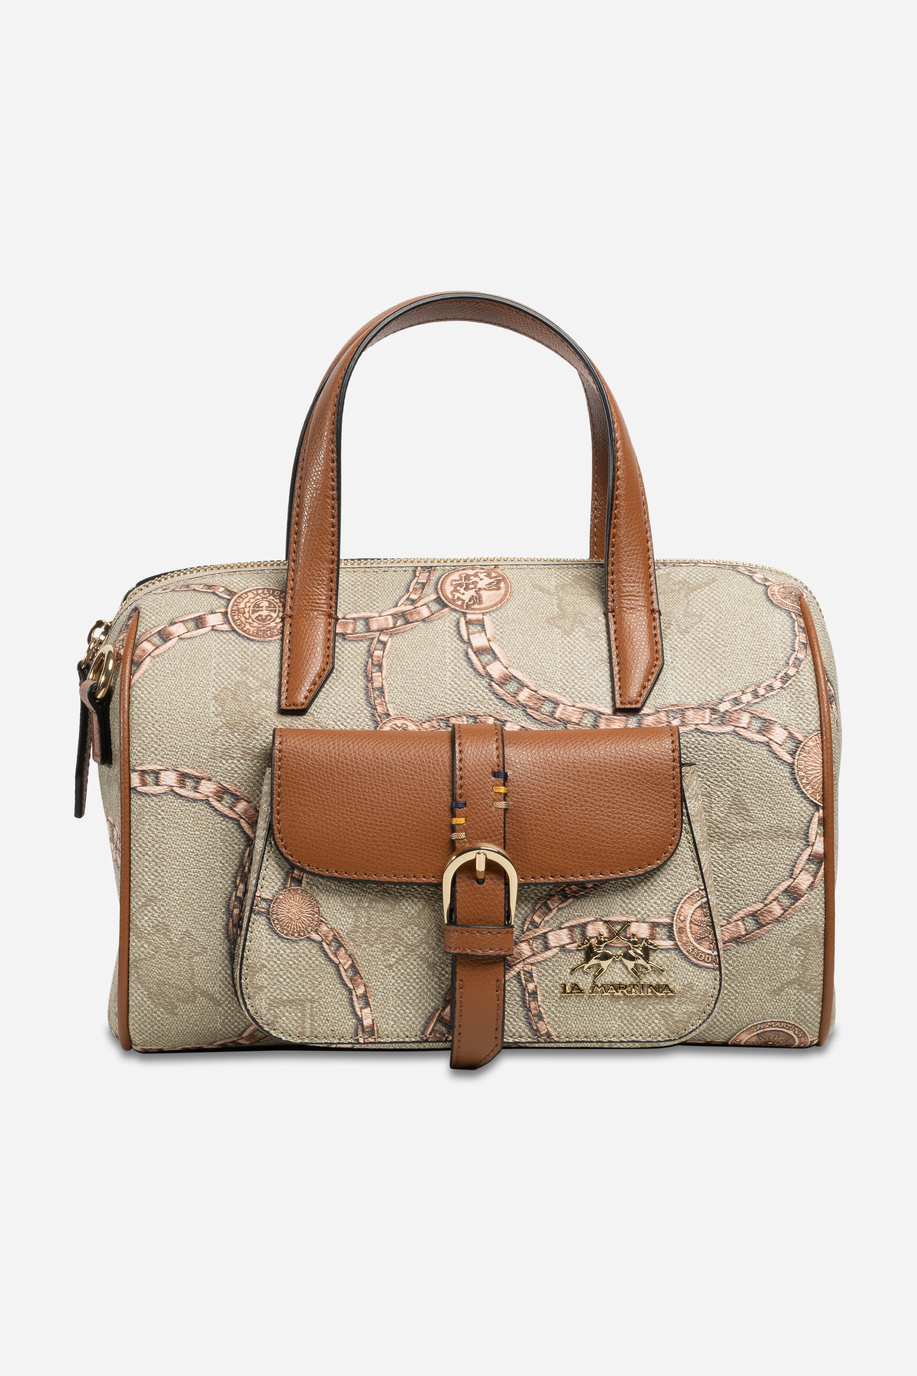 Women's bag in PU fabric and leather - Bags | La Martina - Official Online Shop